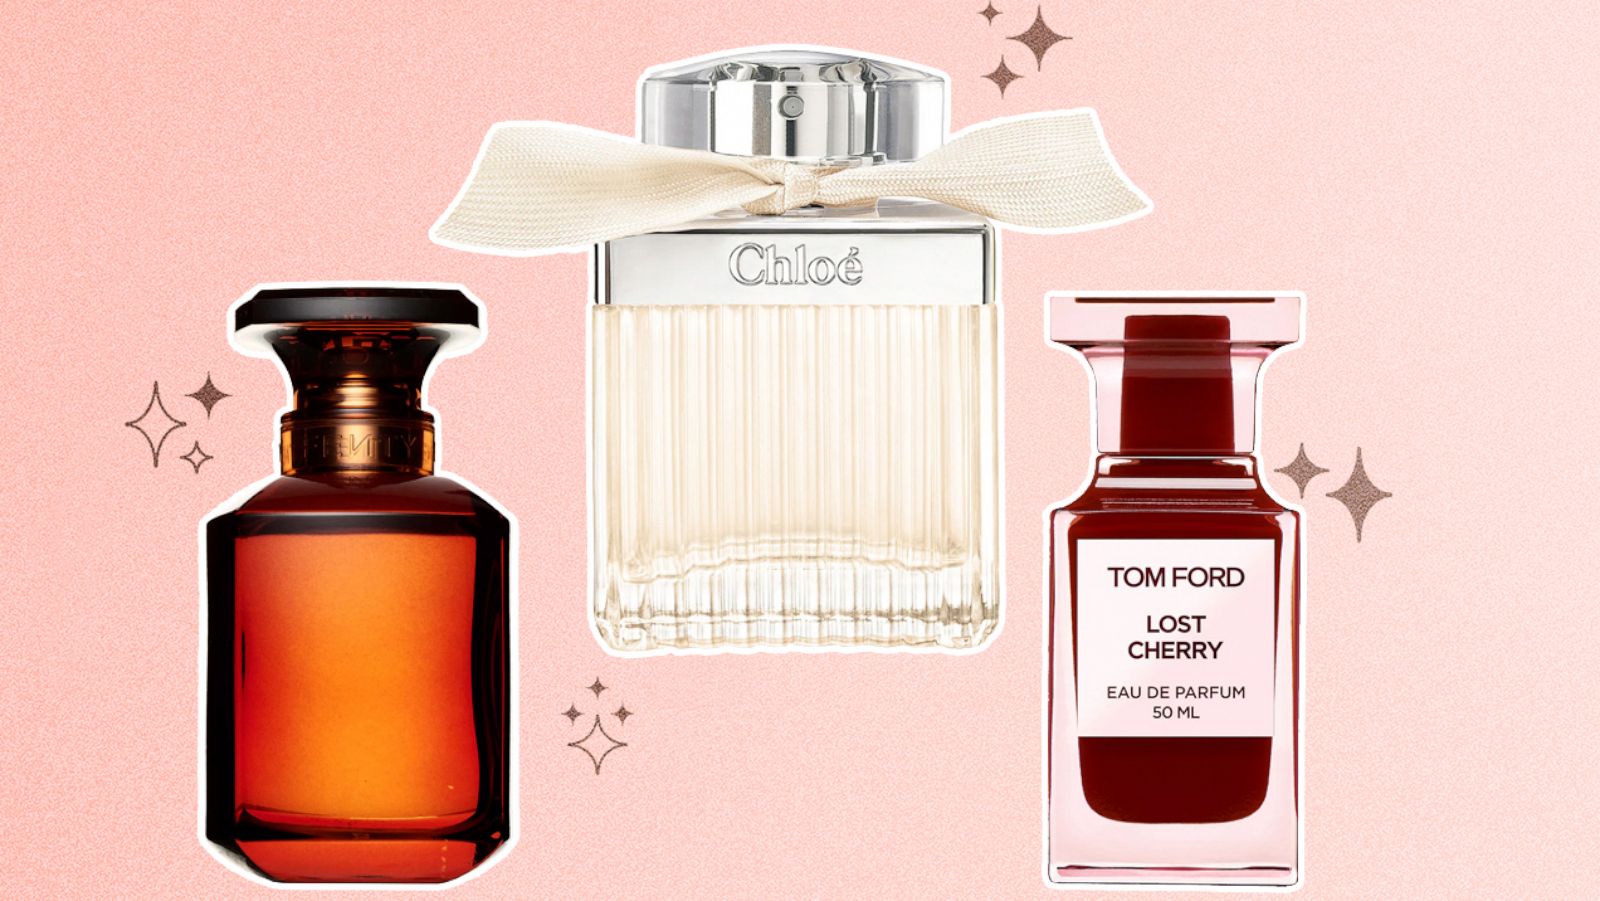 Fragrance for All is here! 20% off Tom Ford, Fenty Beauty, Chloe and more - Good Morning America